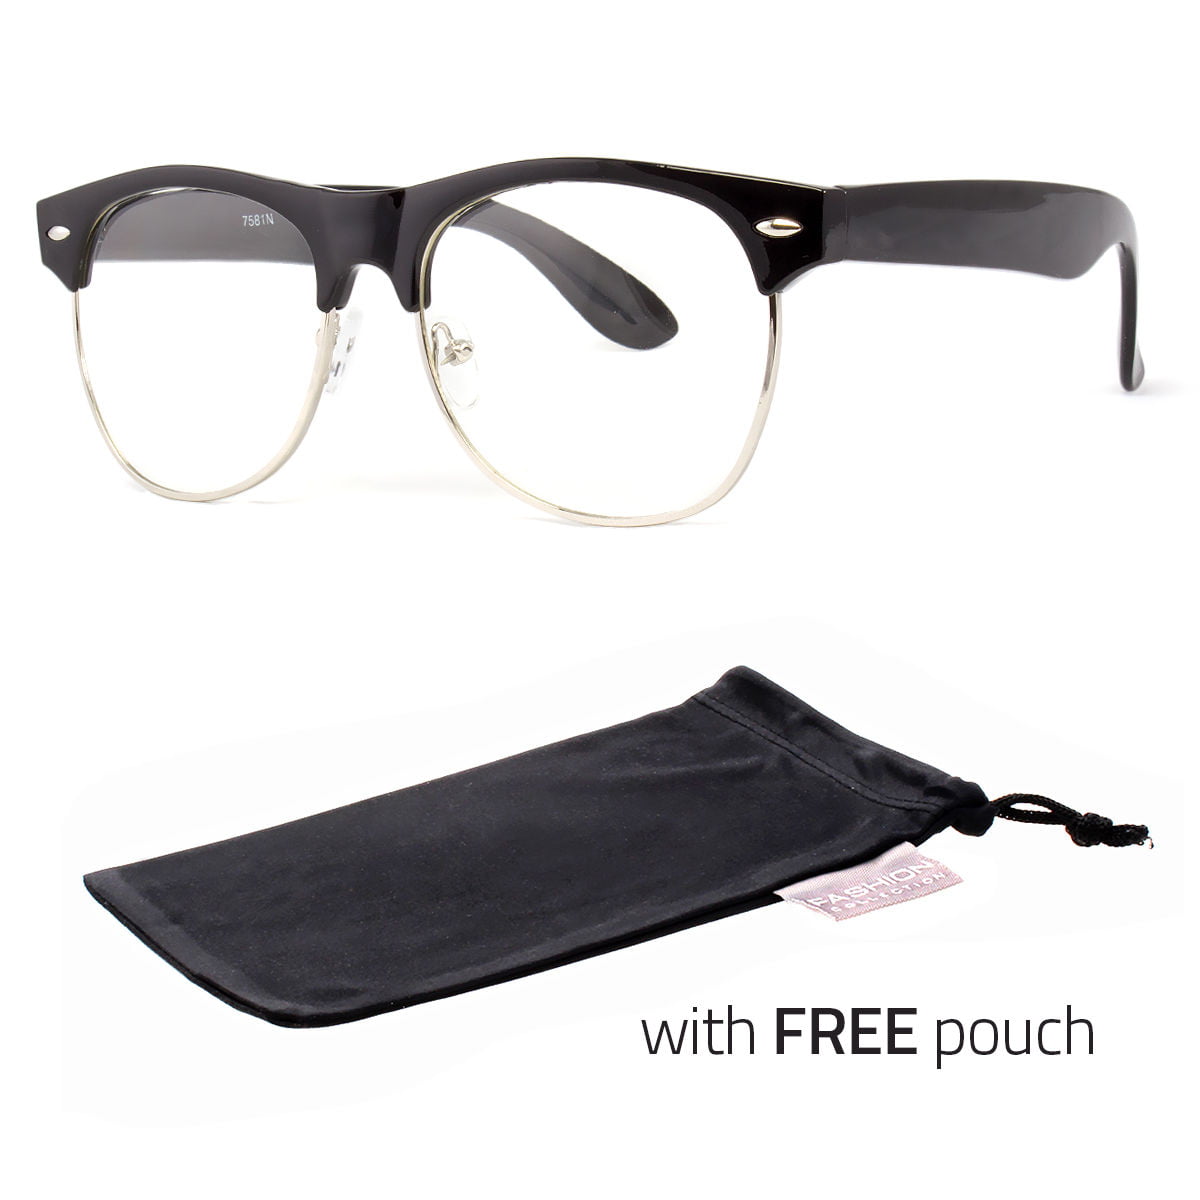 2 Silver Club Style Fashion Half Frame Clear Lens Glasses with FREE 2 Soft Pouch 